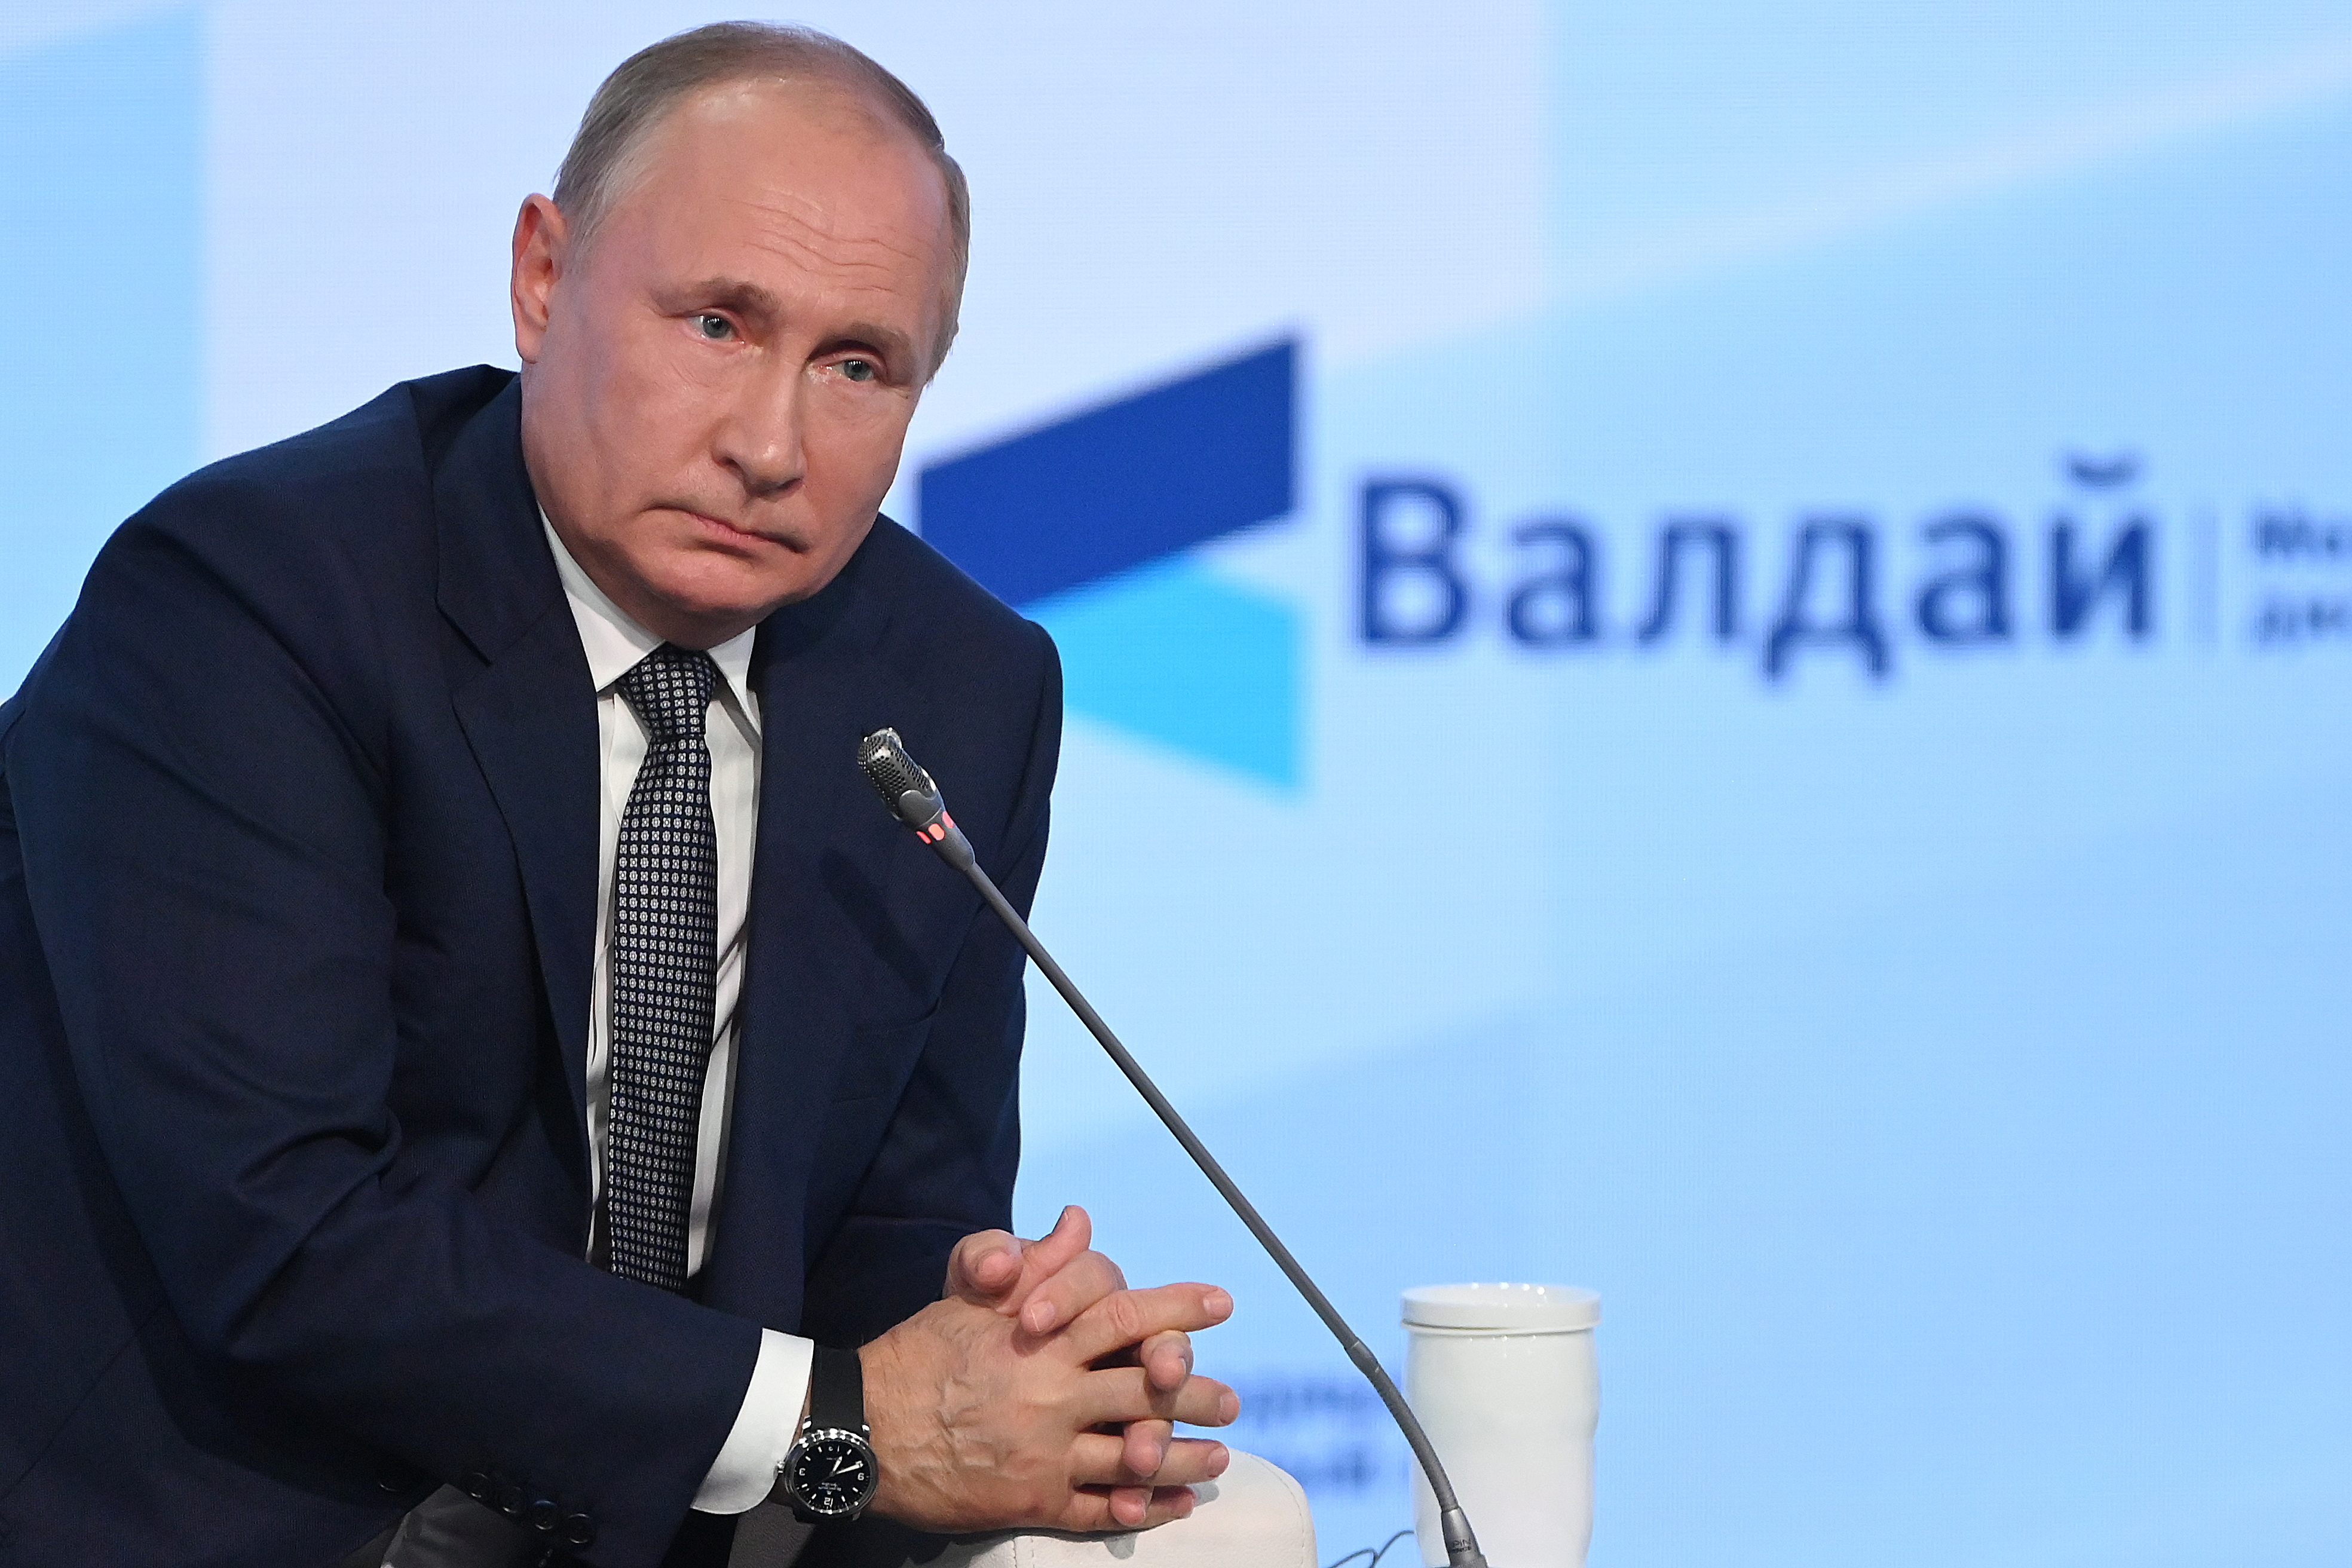 Russia's President Putin attends a session of the Valdai Discussion Club in Sochi